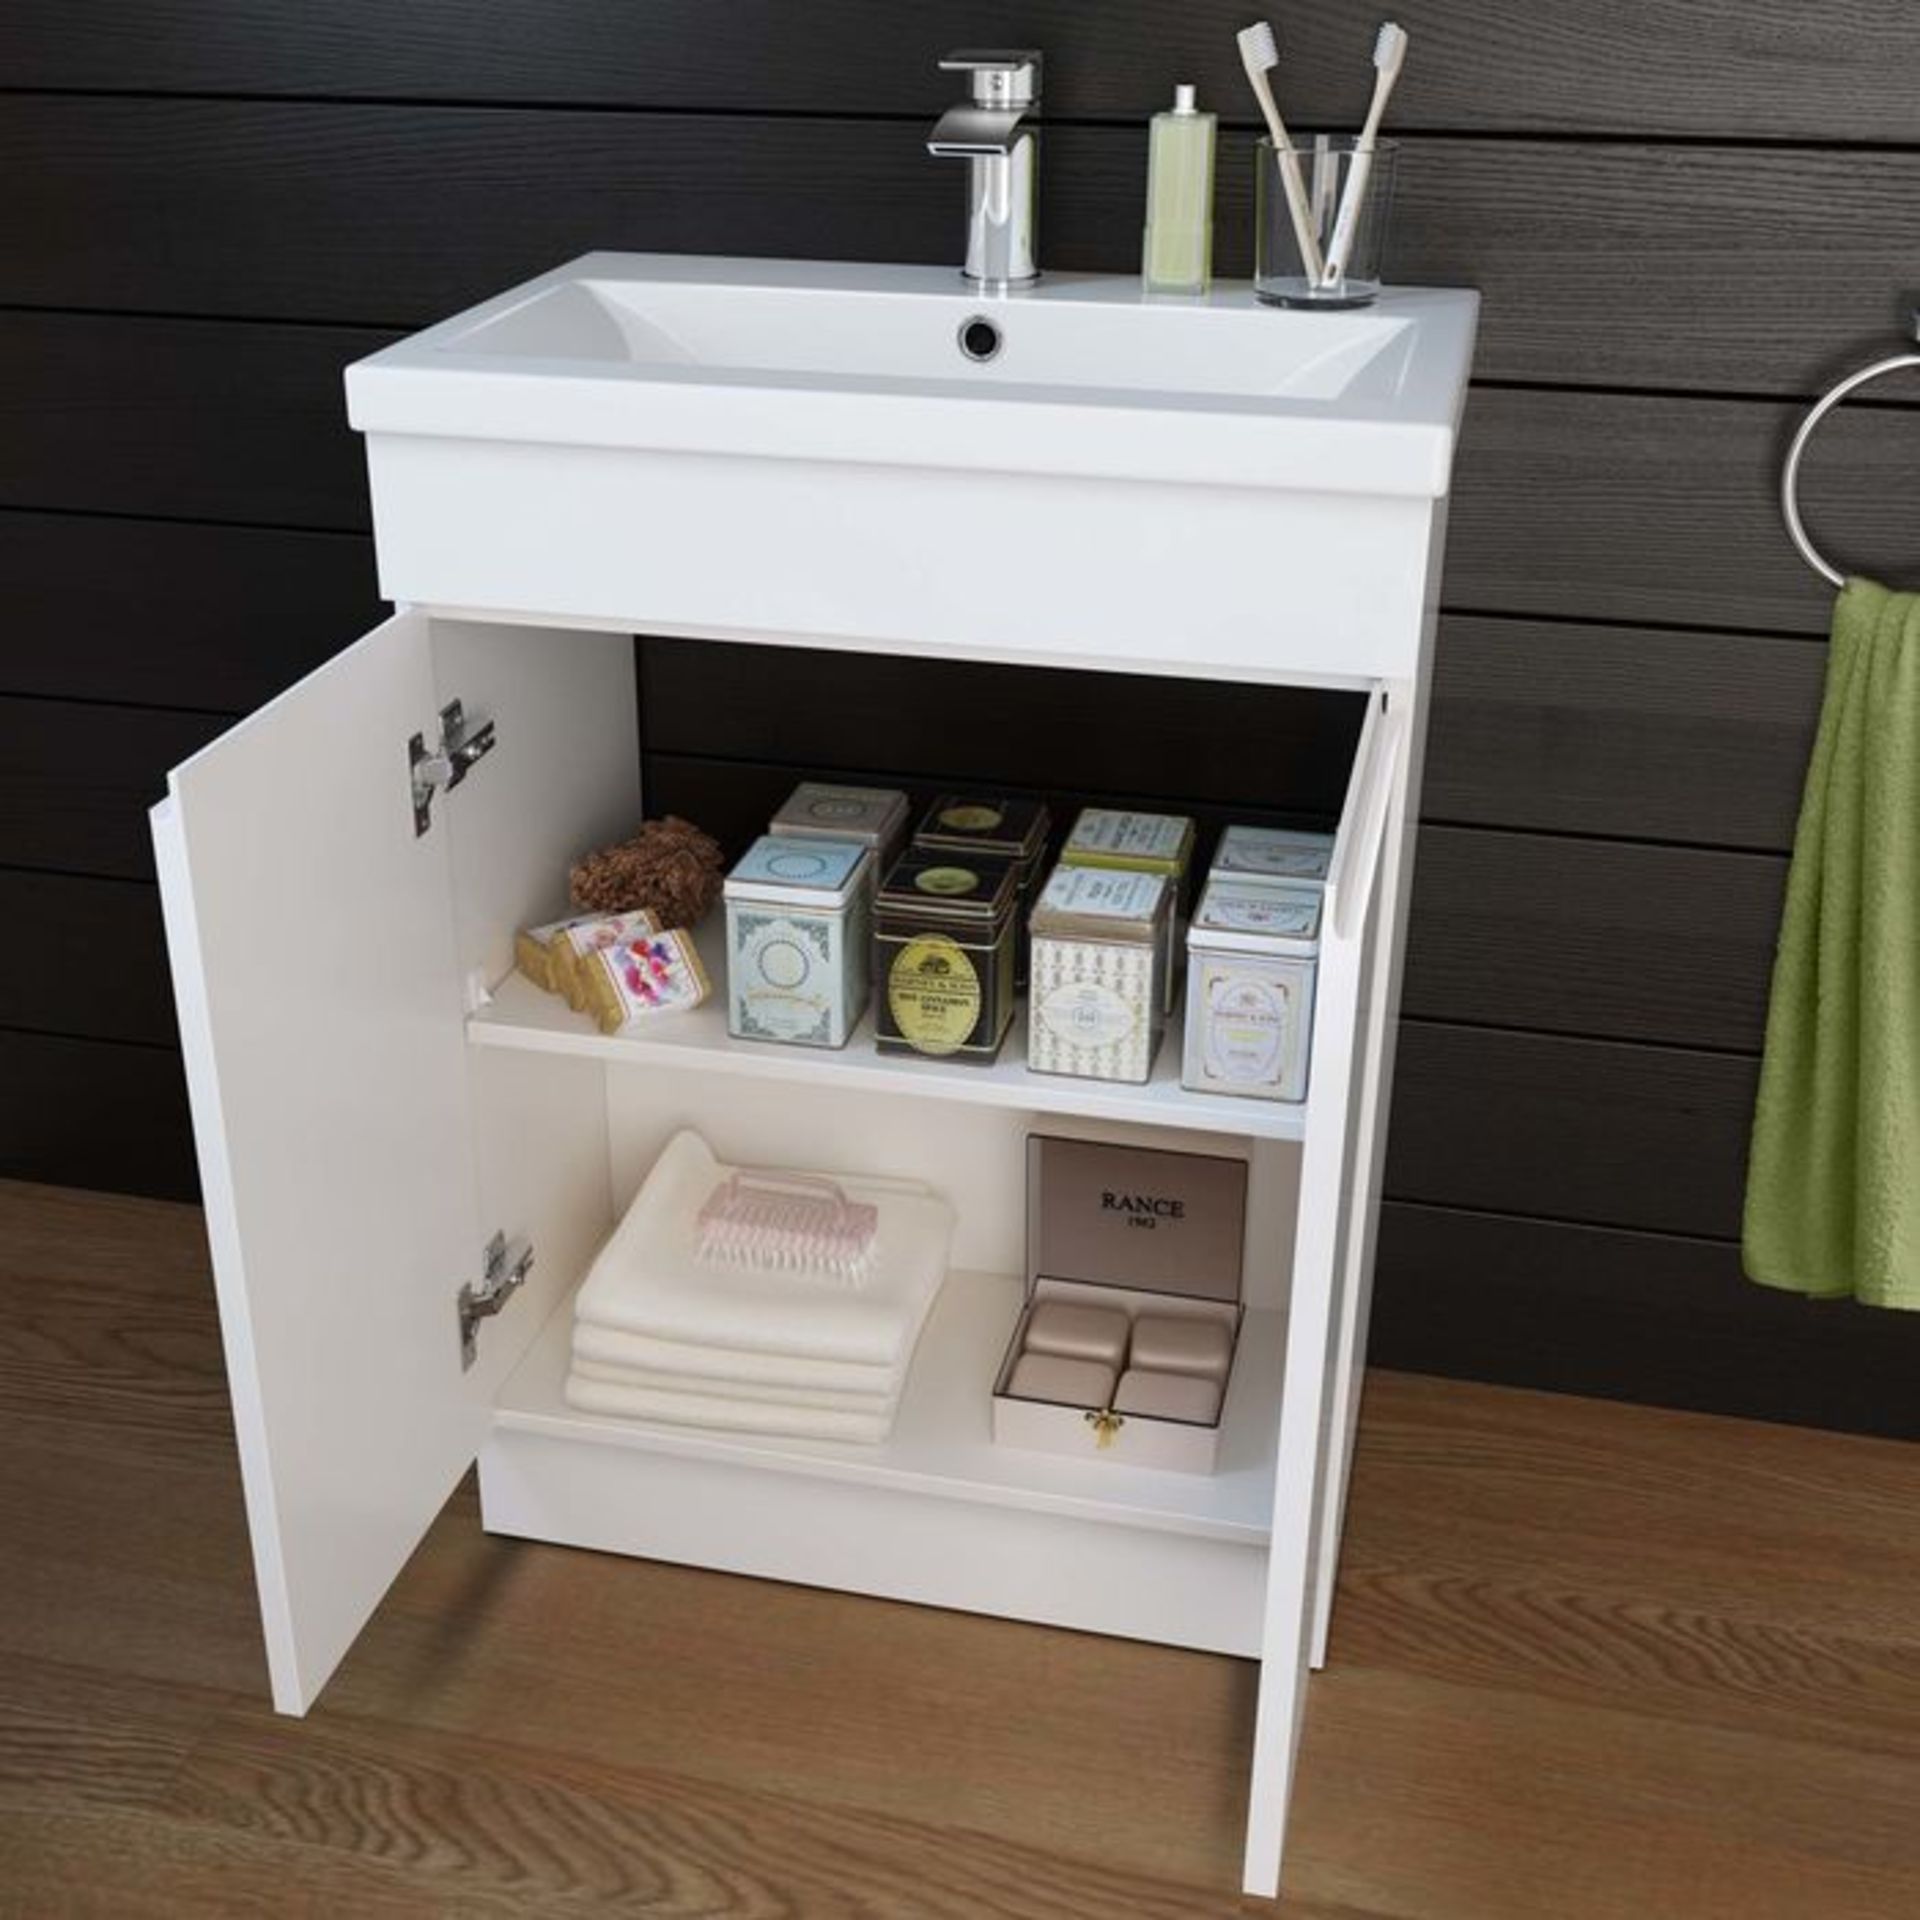 (H21) 600mm Trent High Gloss White Basin Cabinet - Floor Standing RRP £499.99. Includes groove - Image 3 of 4